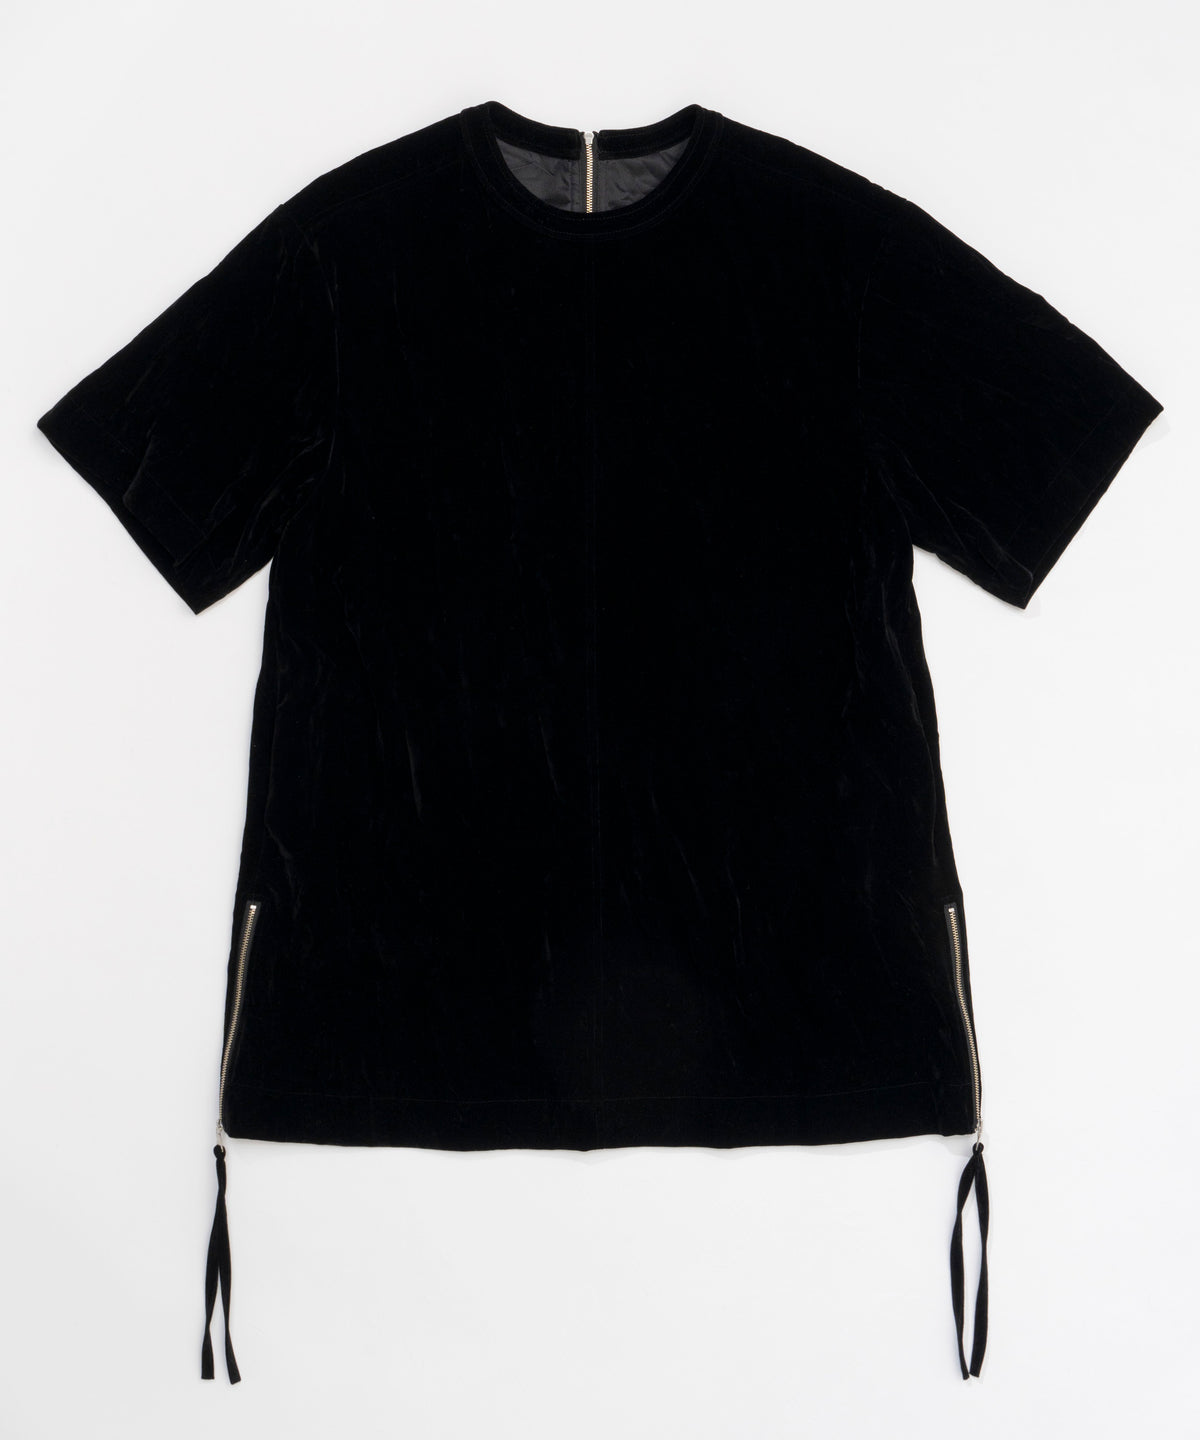 【24AUTUMN PRE-ORDER】Washer Processing Velor Tunic